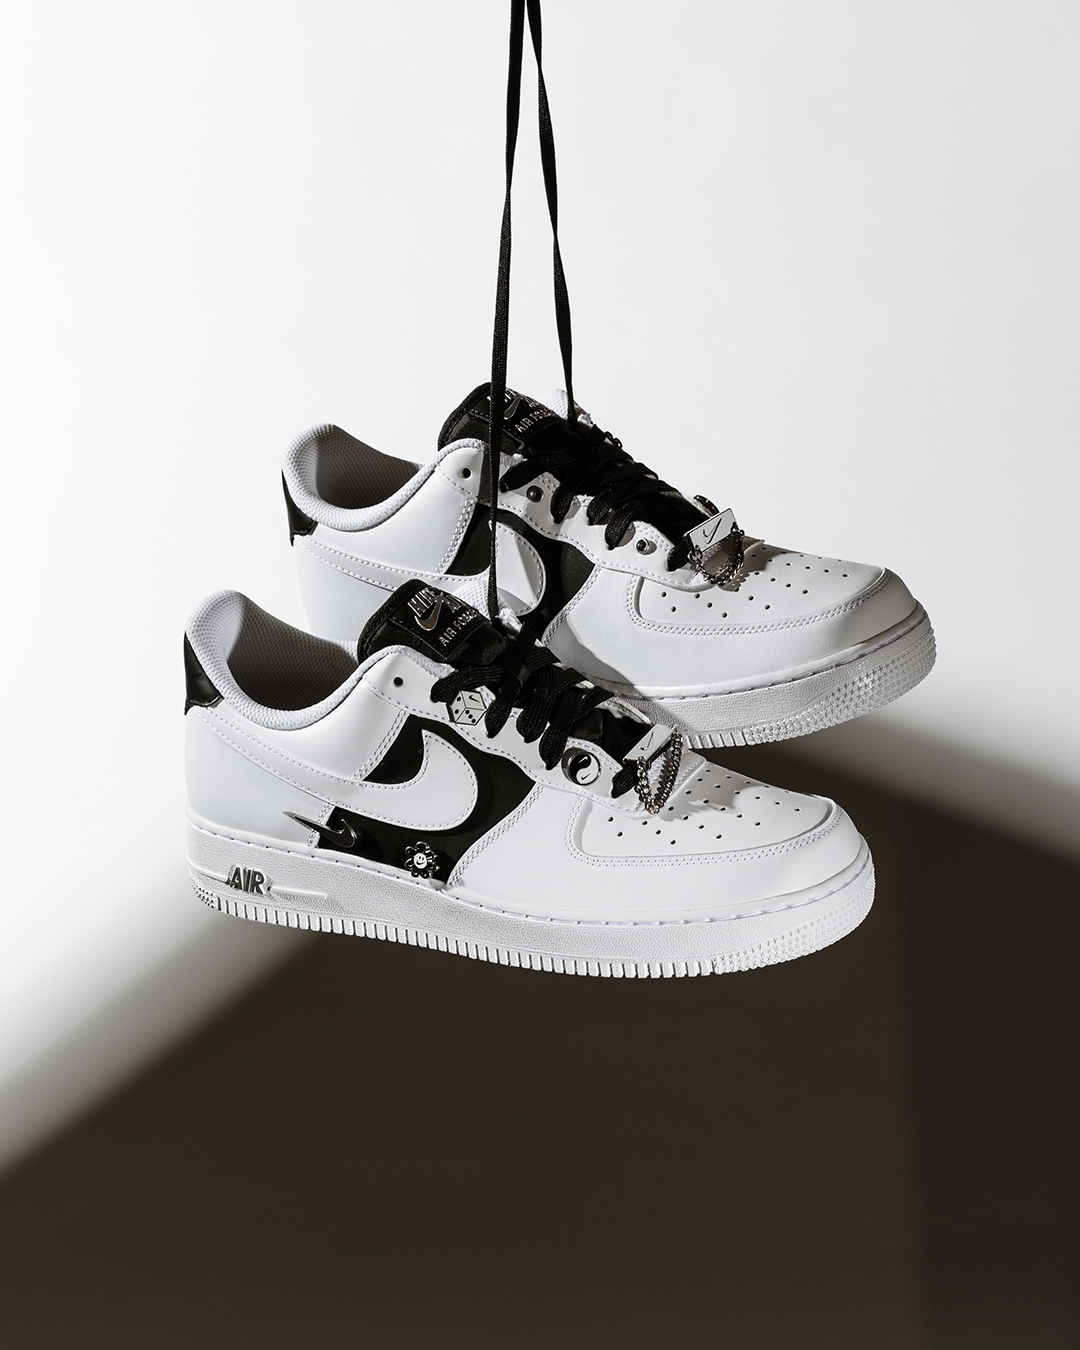 Desgastar entrada Pastor Foot Locker on Twitter: "A few pieces to complement the AF1 💎 #Nike Air  Force One 'Shoelery' available online + in-store. Shop:  https://t.co/t2QkOWHTv2 https://t.co/QSB8j0g1TP" / Twitter